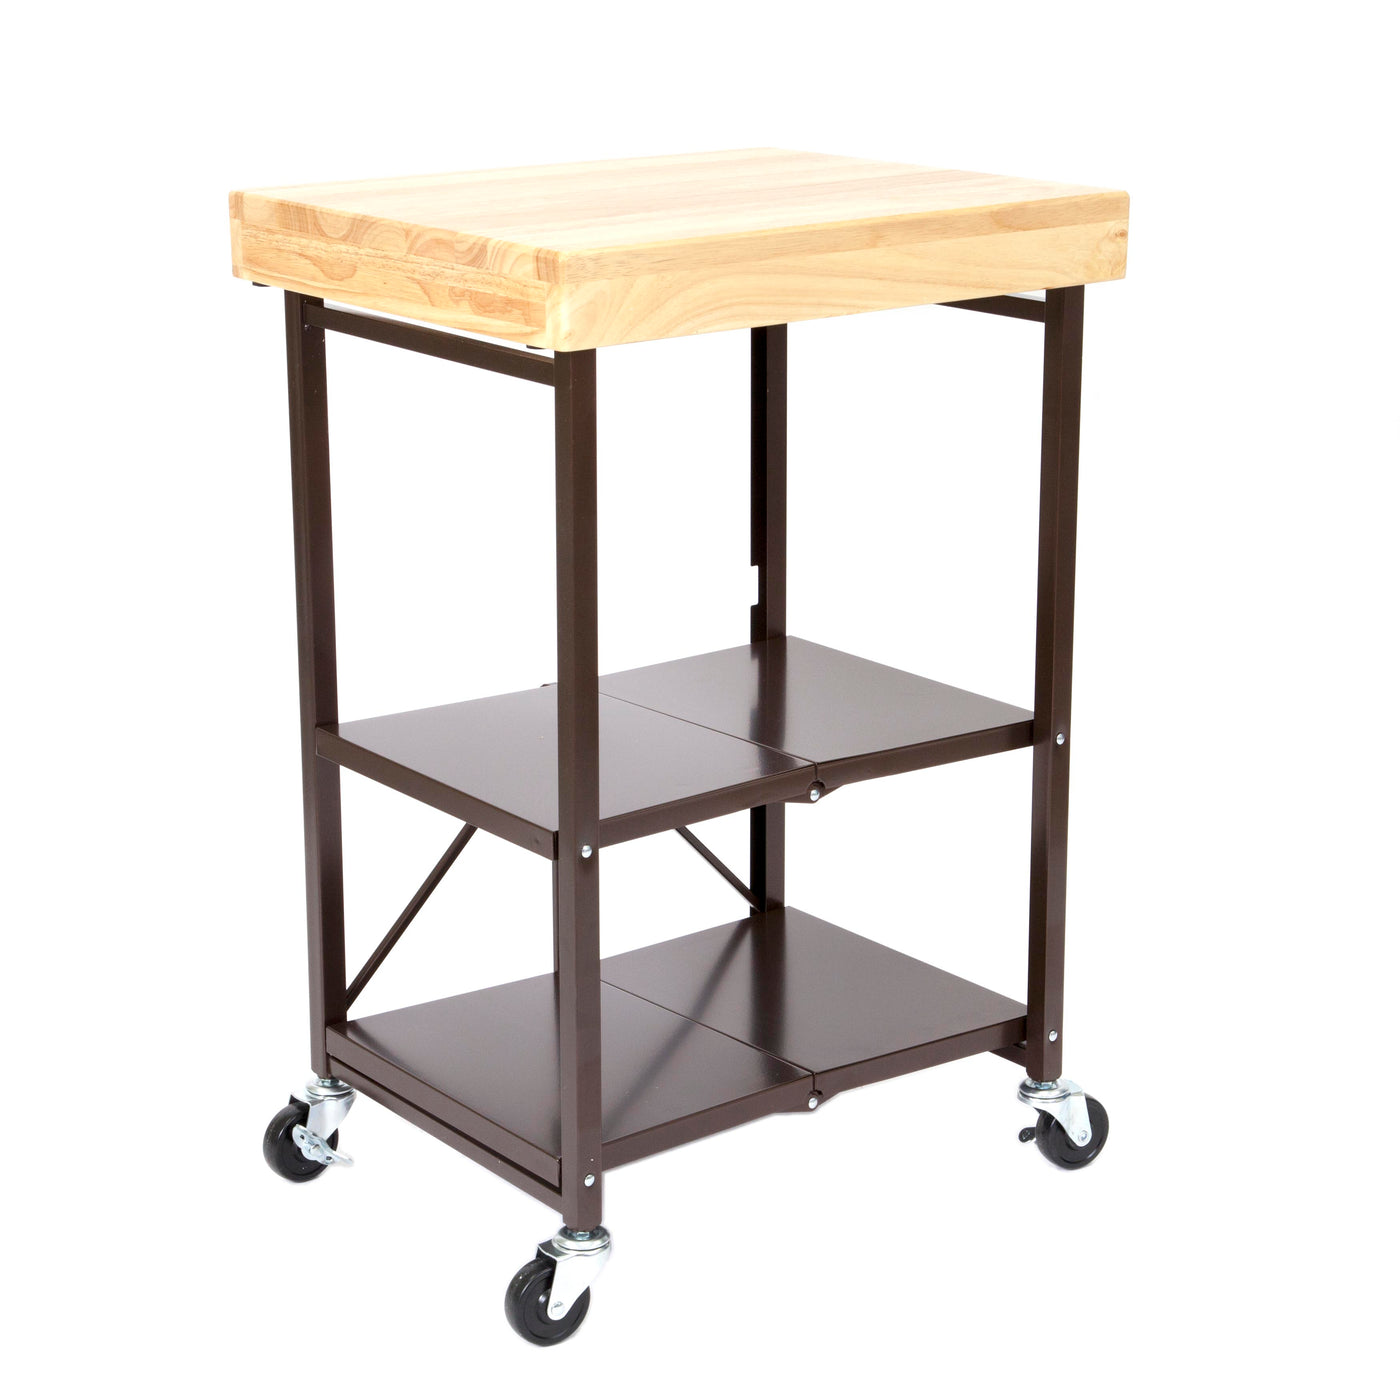 Origami Foldout 3-Shelf Kitchen Serving Island Cart With Wheels